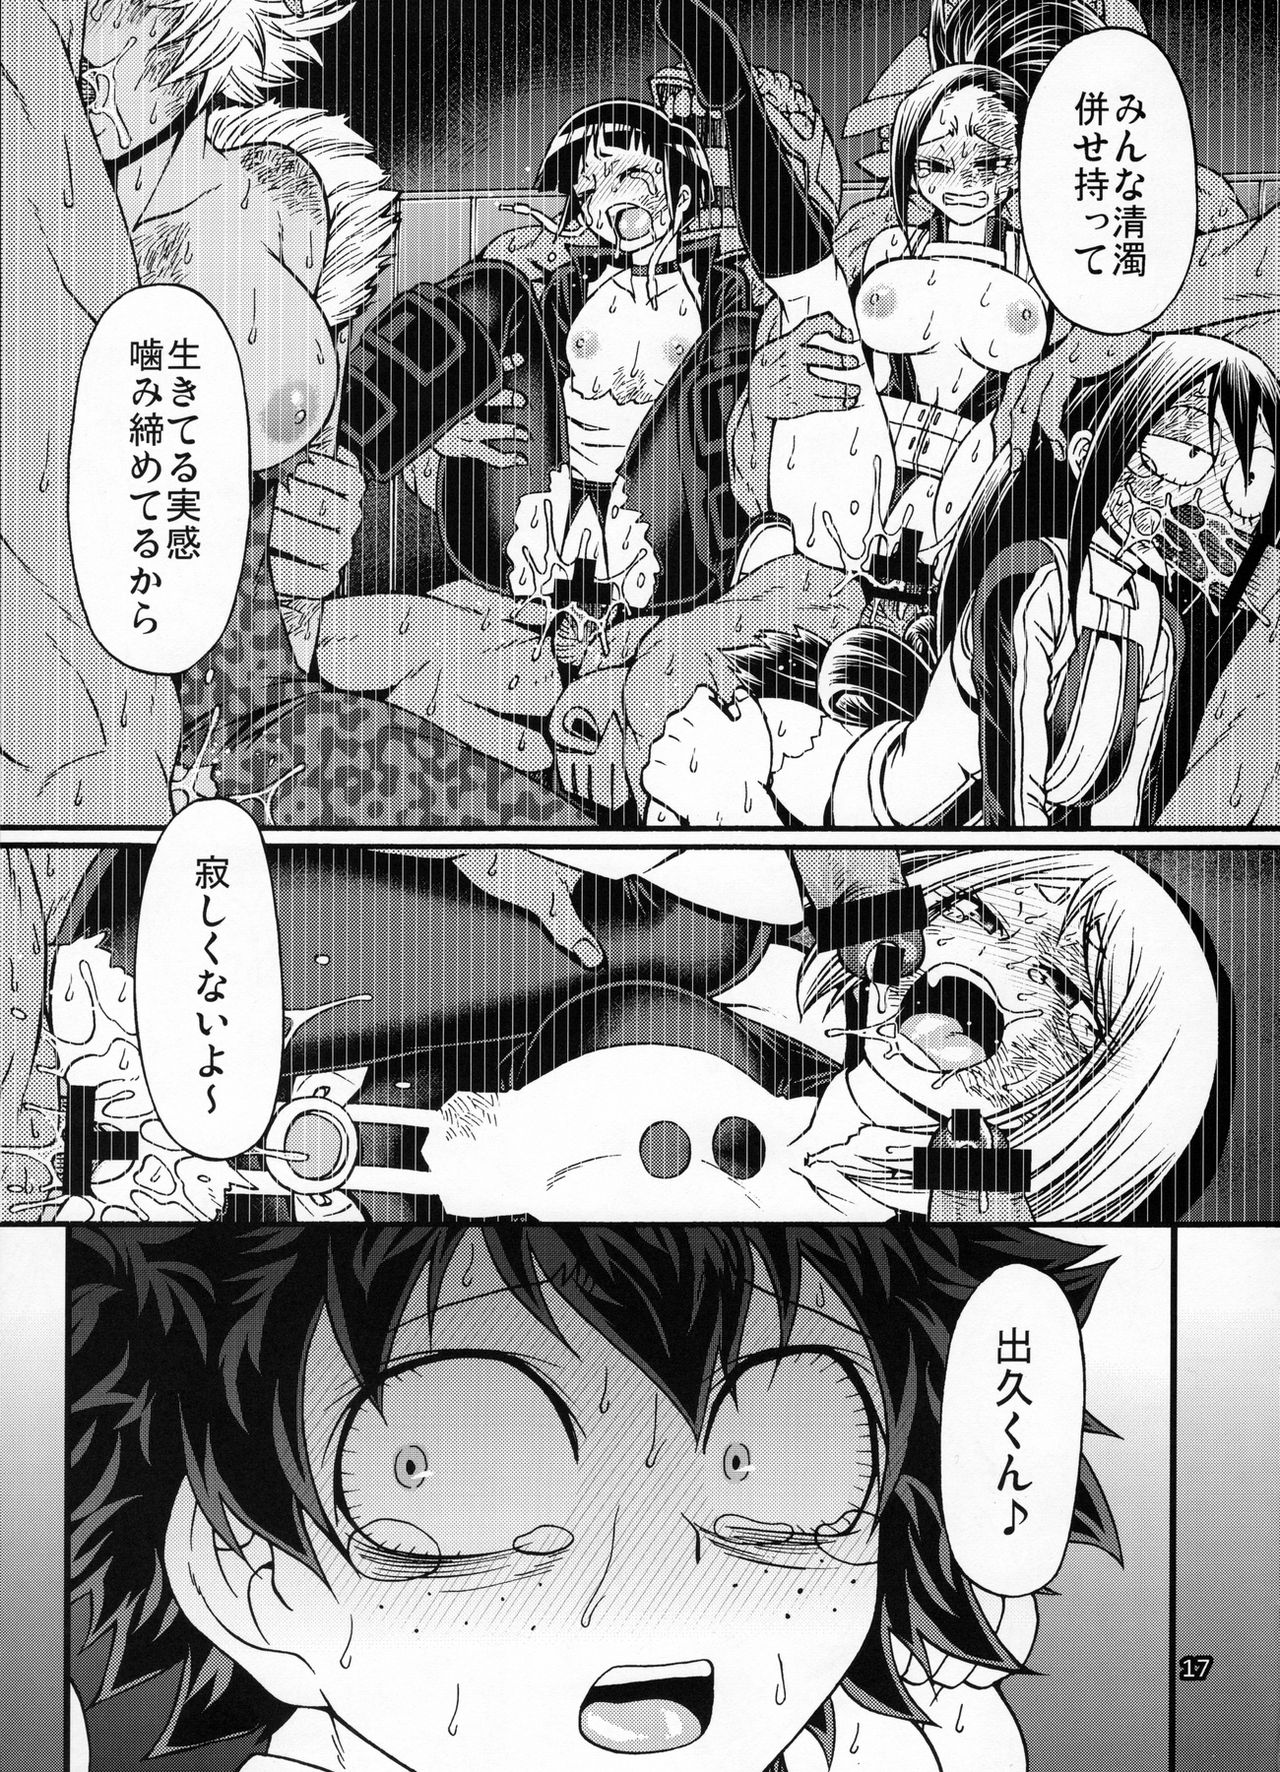 (C91) [CELLULOID-ACME (Chiba Toshirou)] Love you as Kill you (My Hero Academia) page 16 full